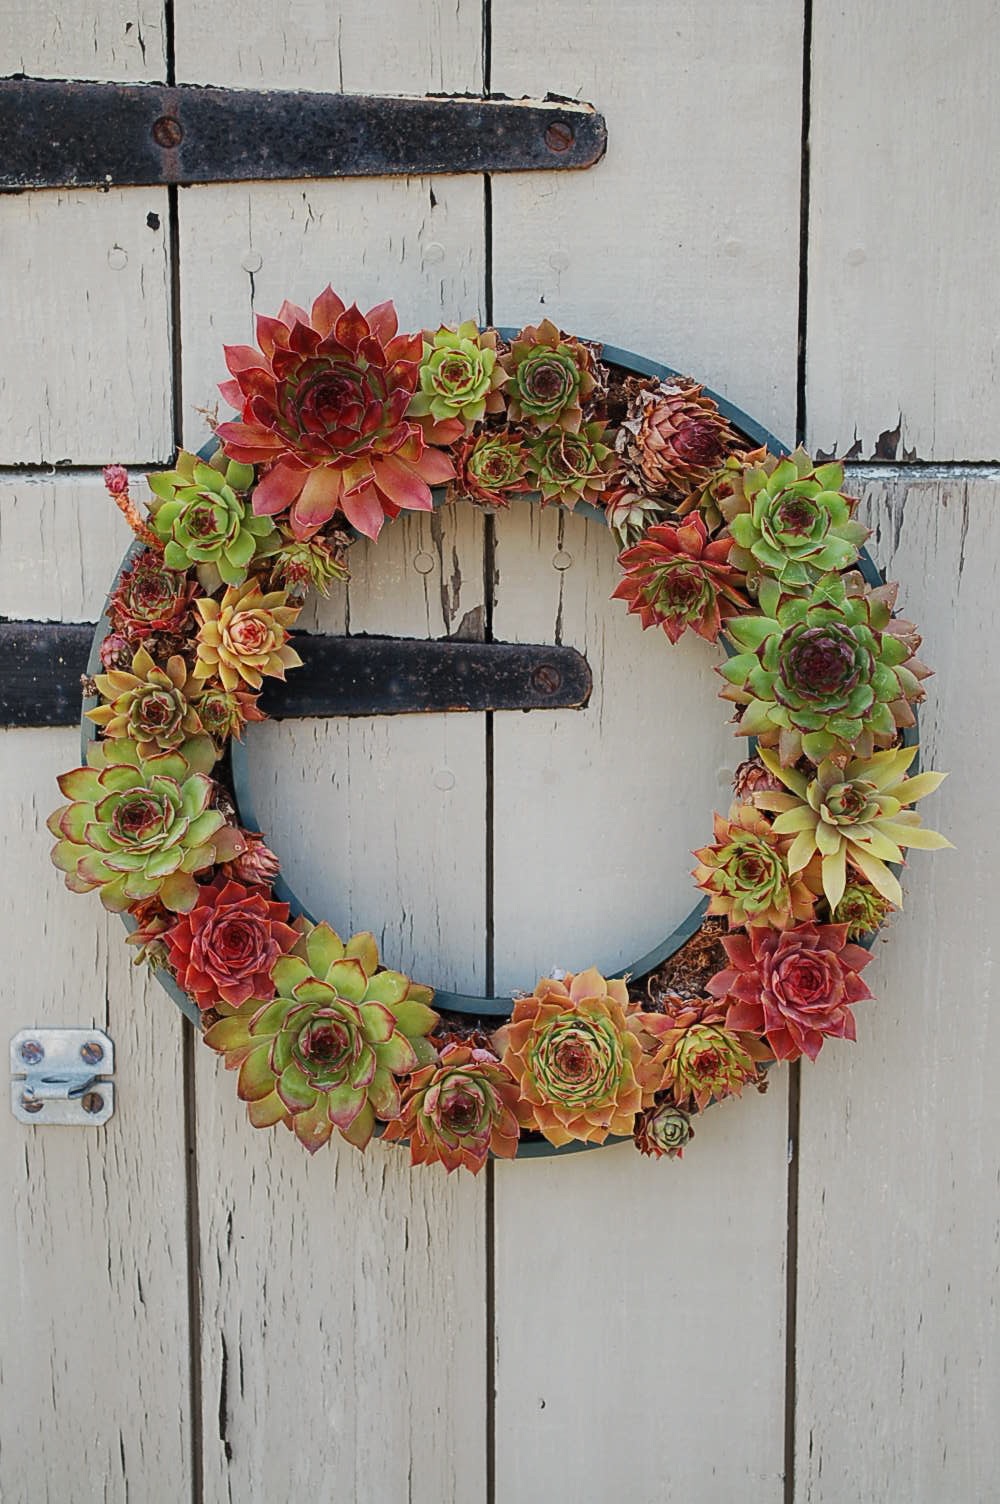 Tire used as base for succulent wreath.jpg